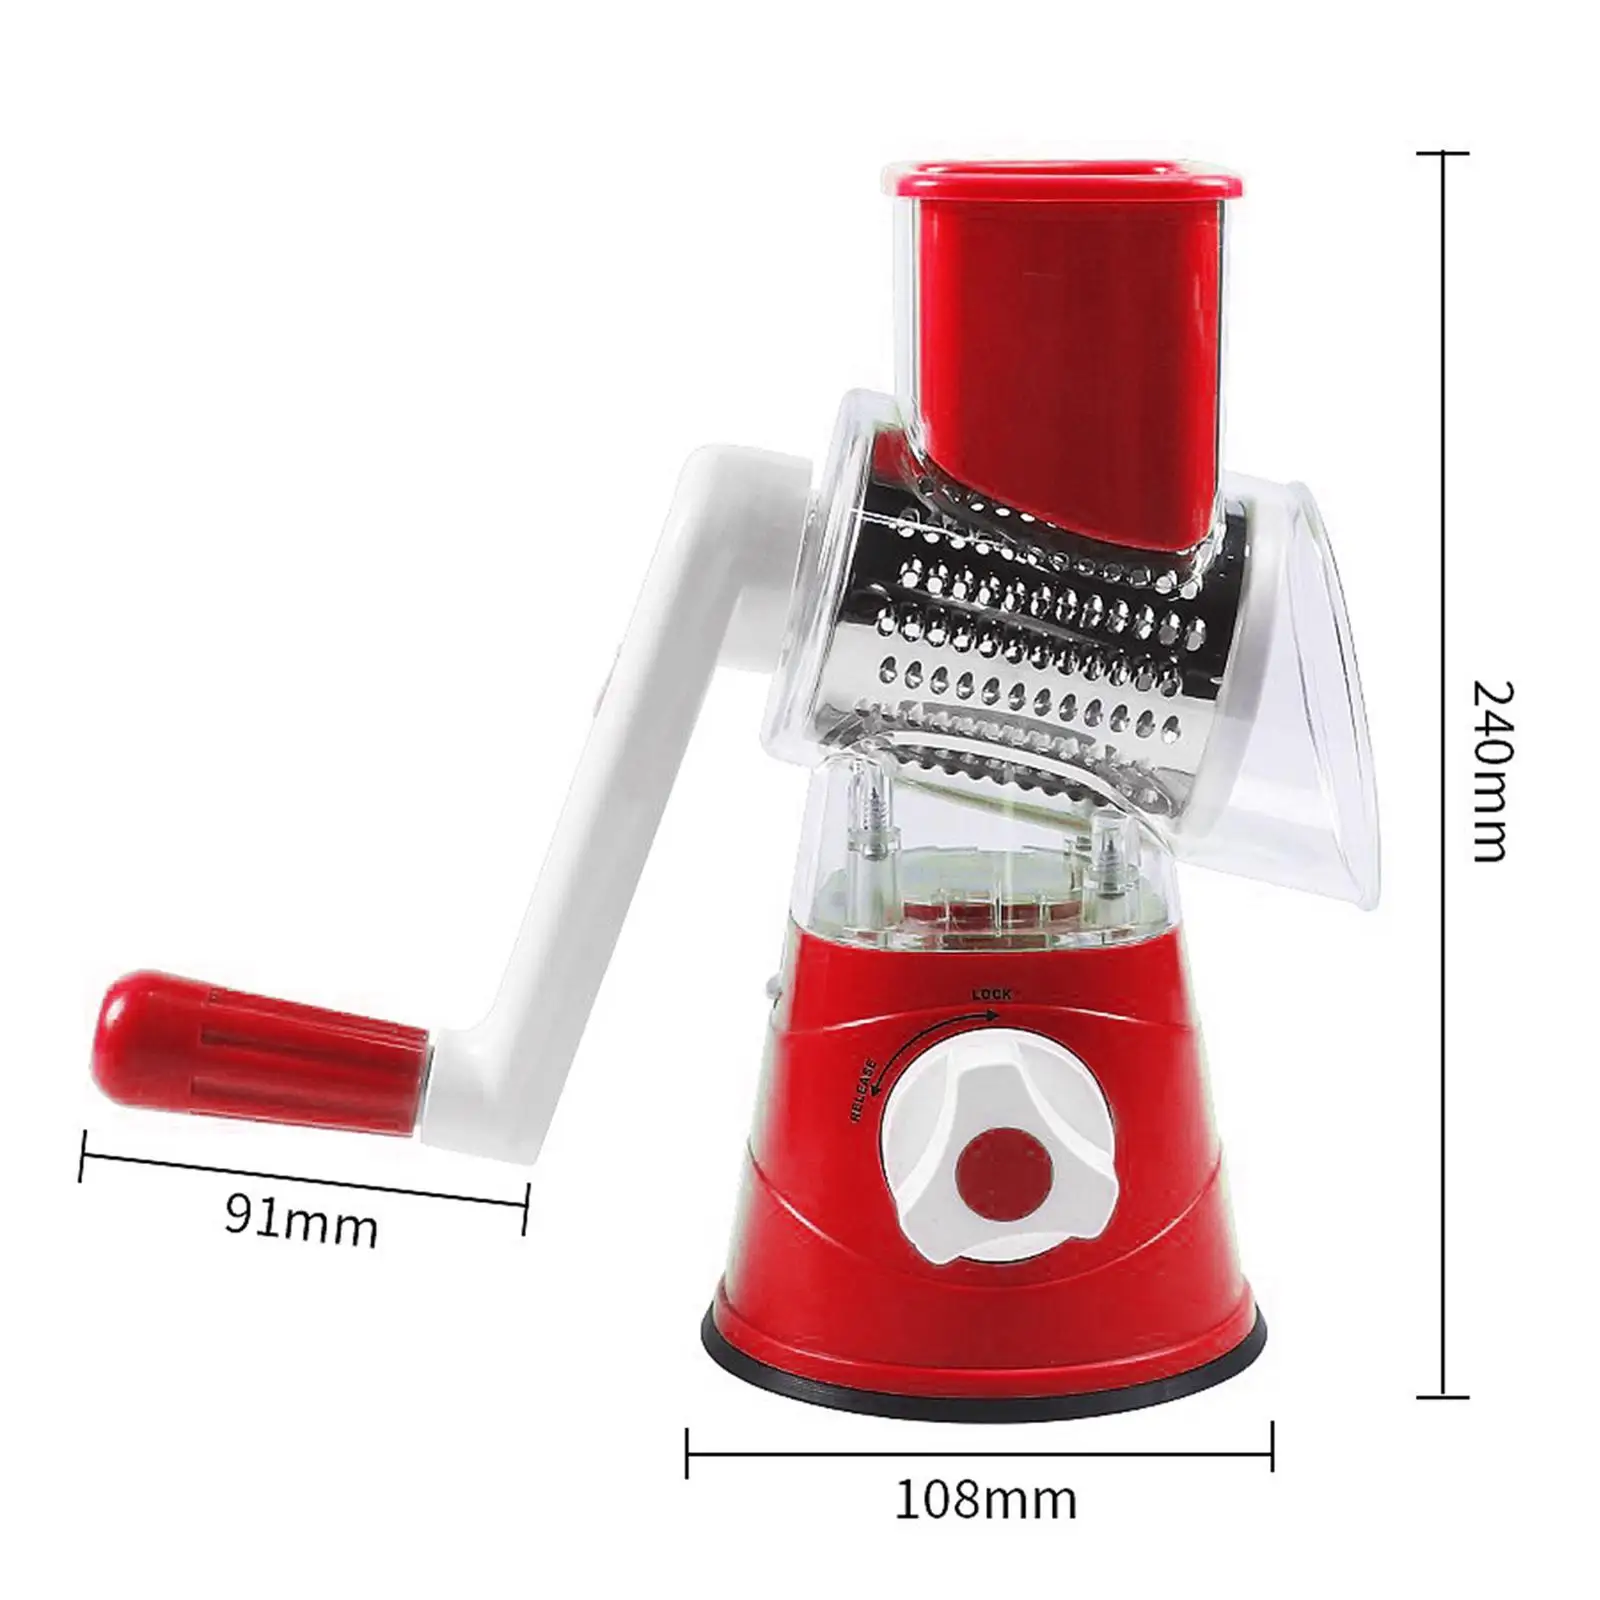 Manual vegetable cutter 3 blades, red